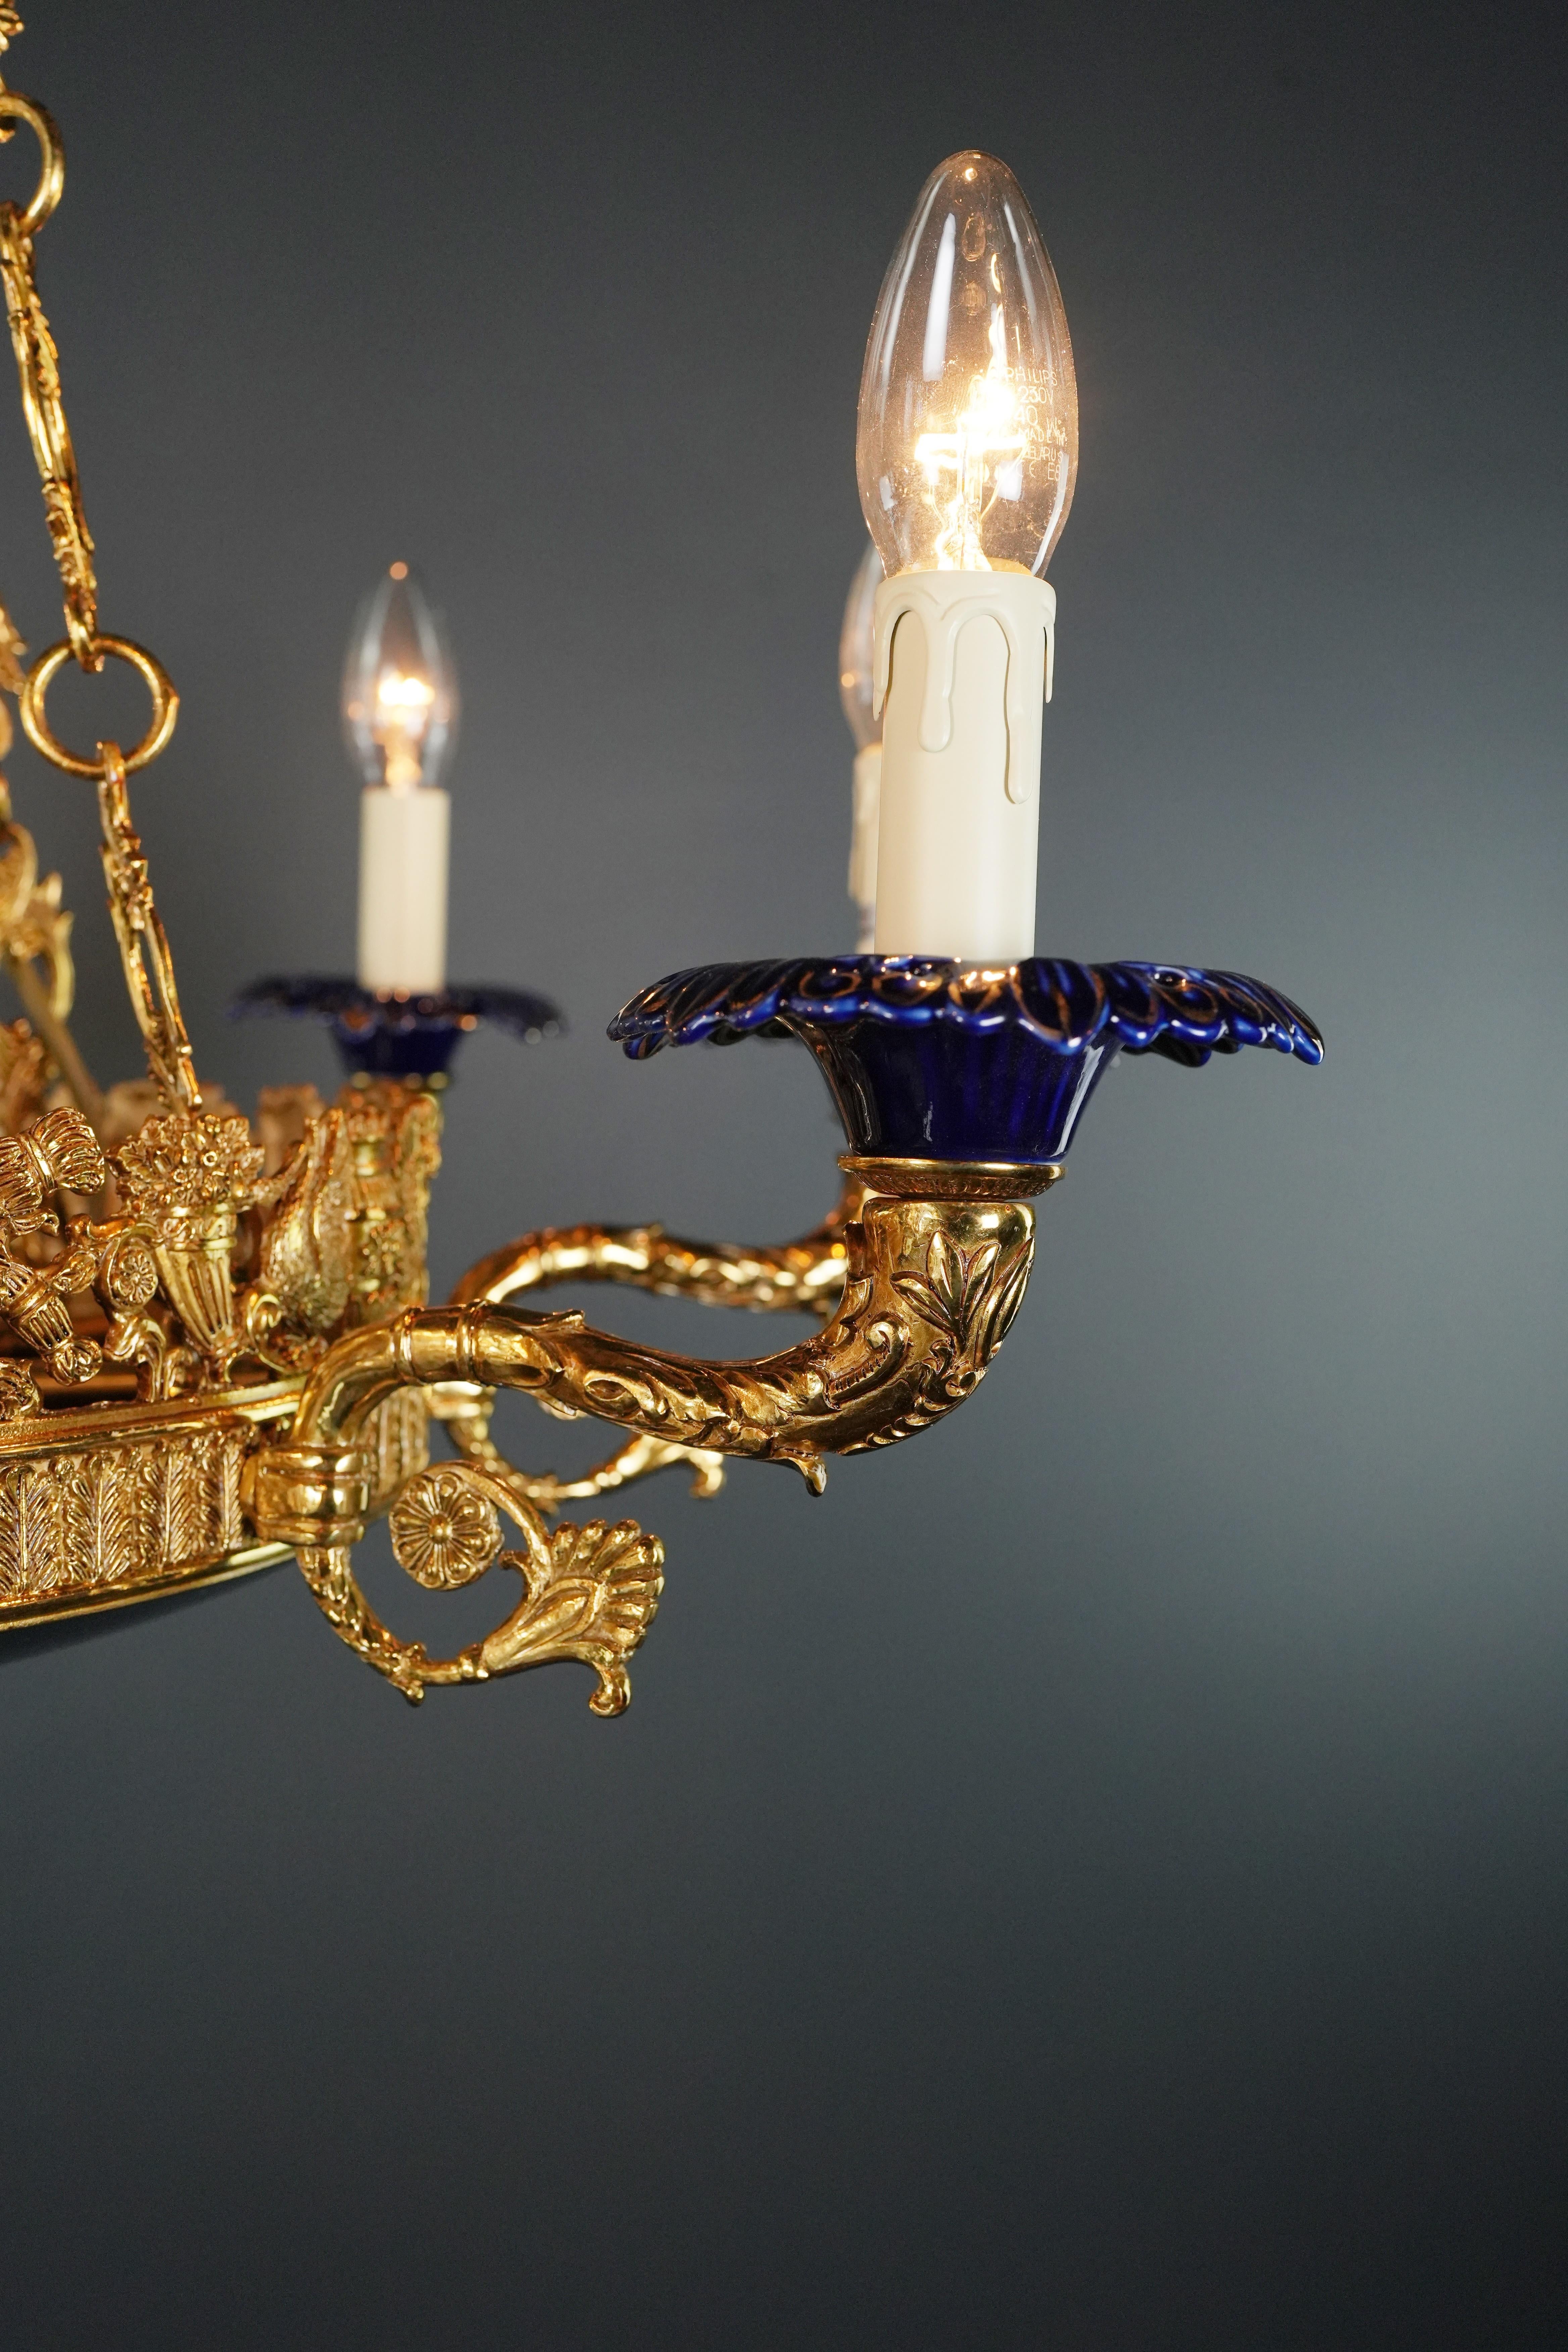 Peacock Bird French Brass Empire Chandelier Lustre Lamp Antique Gold Art Deco For Sale 1